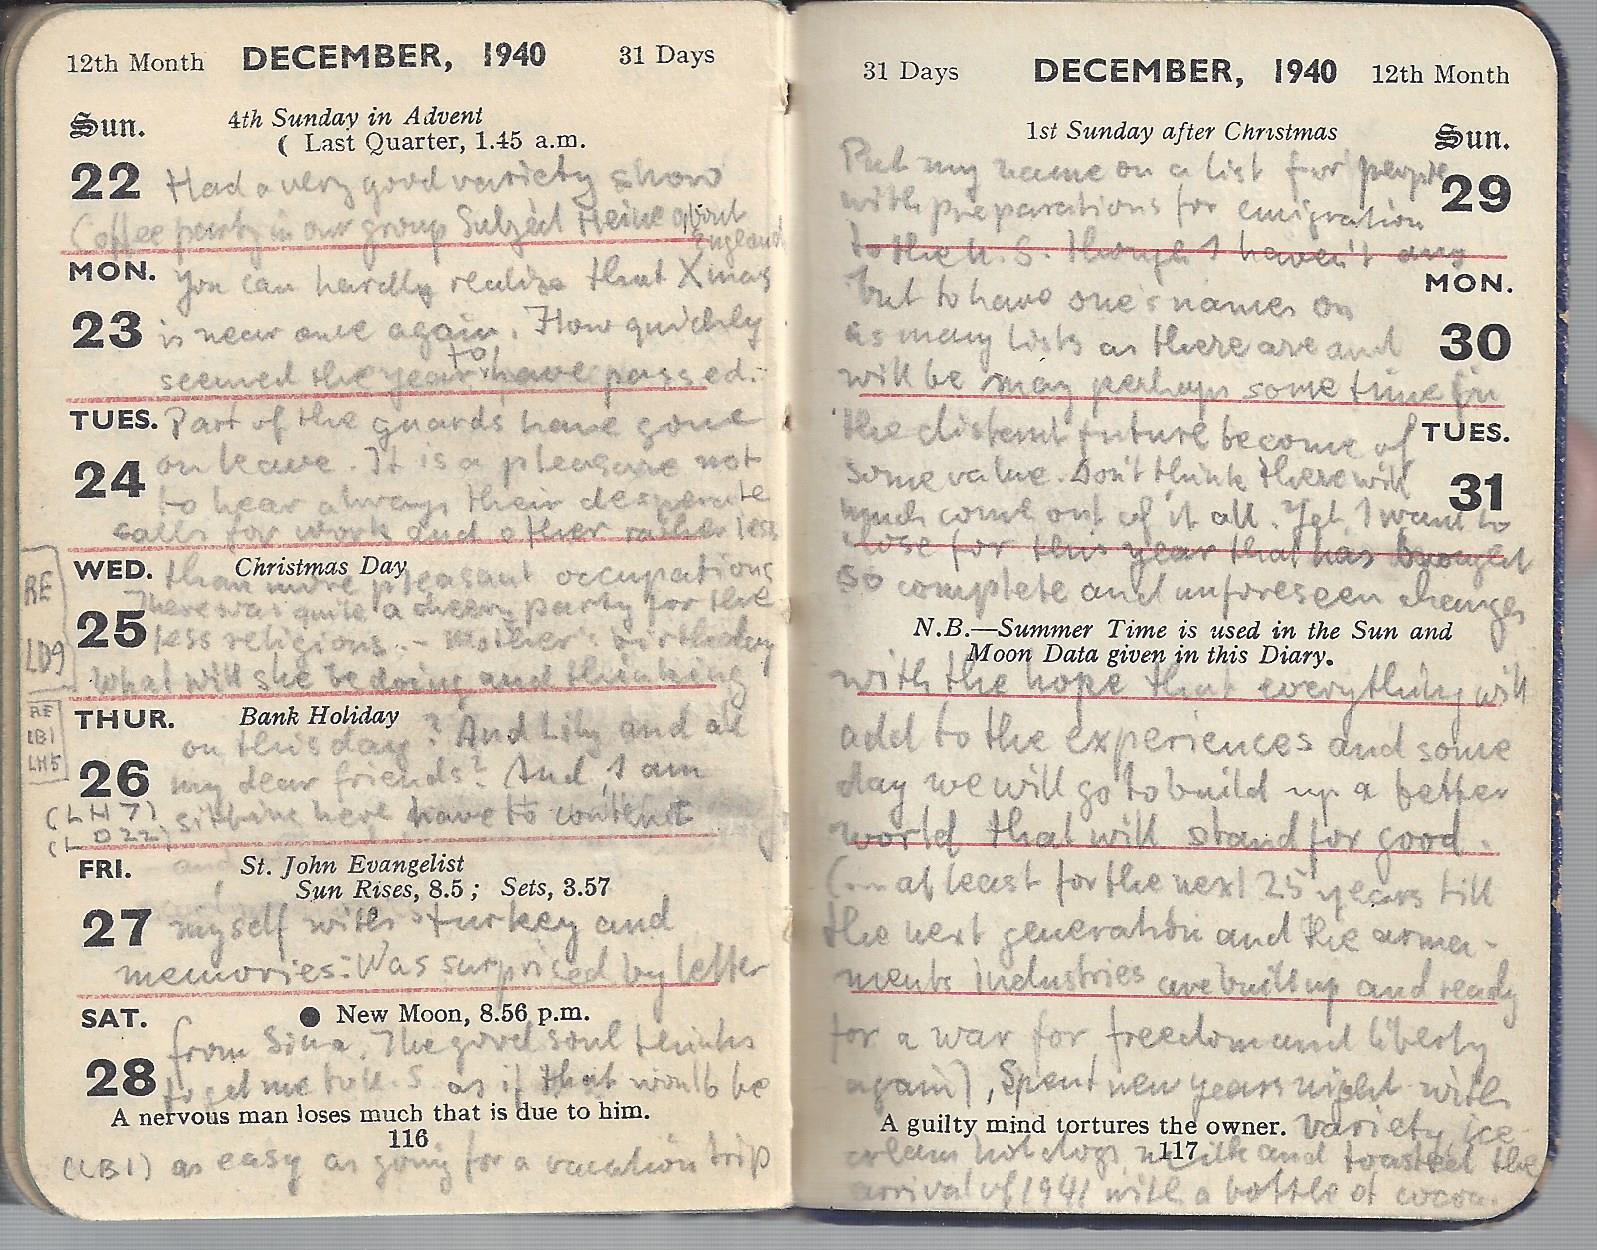 Photo of entry in Heinrich Pfeil's diary, 1940-1941 